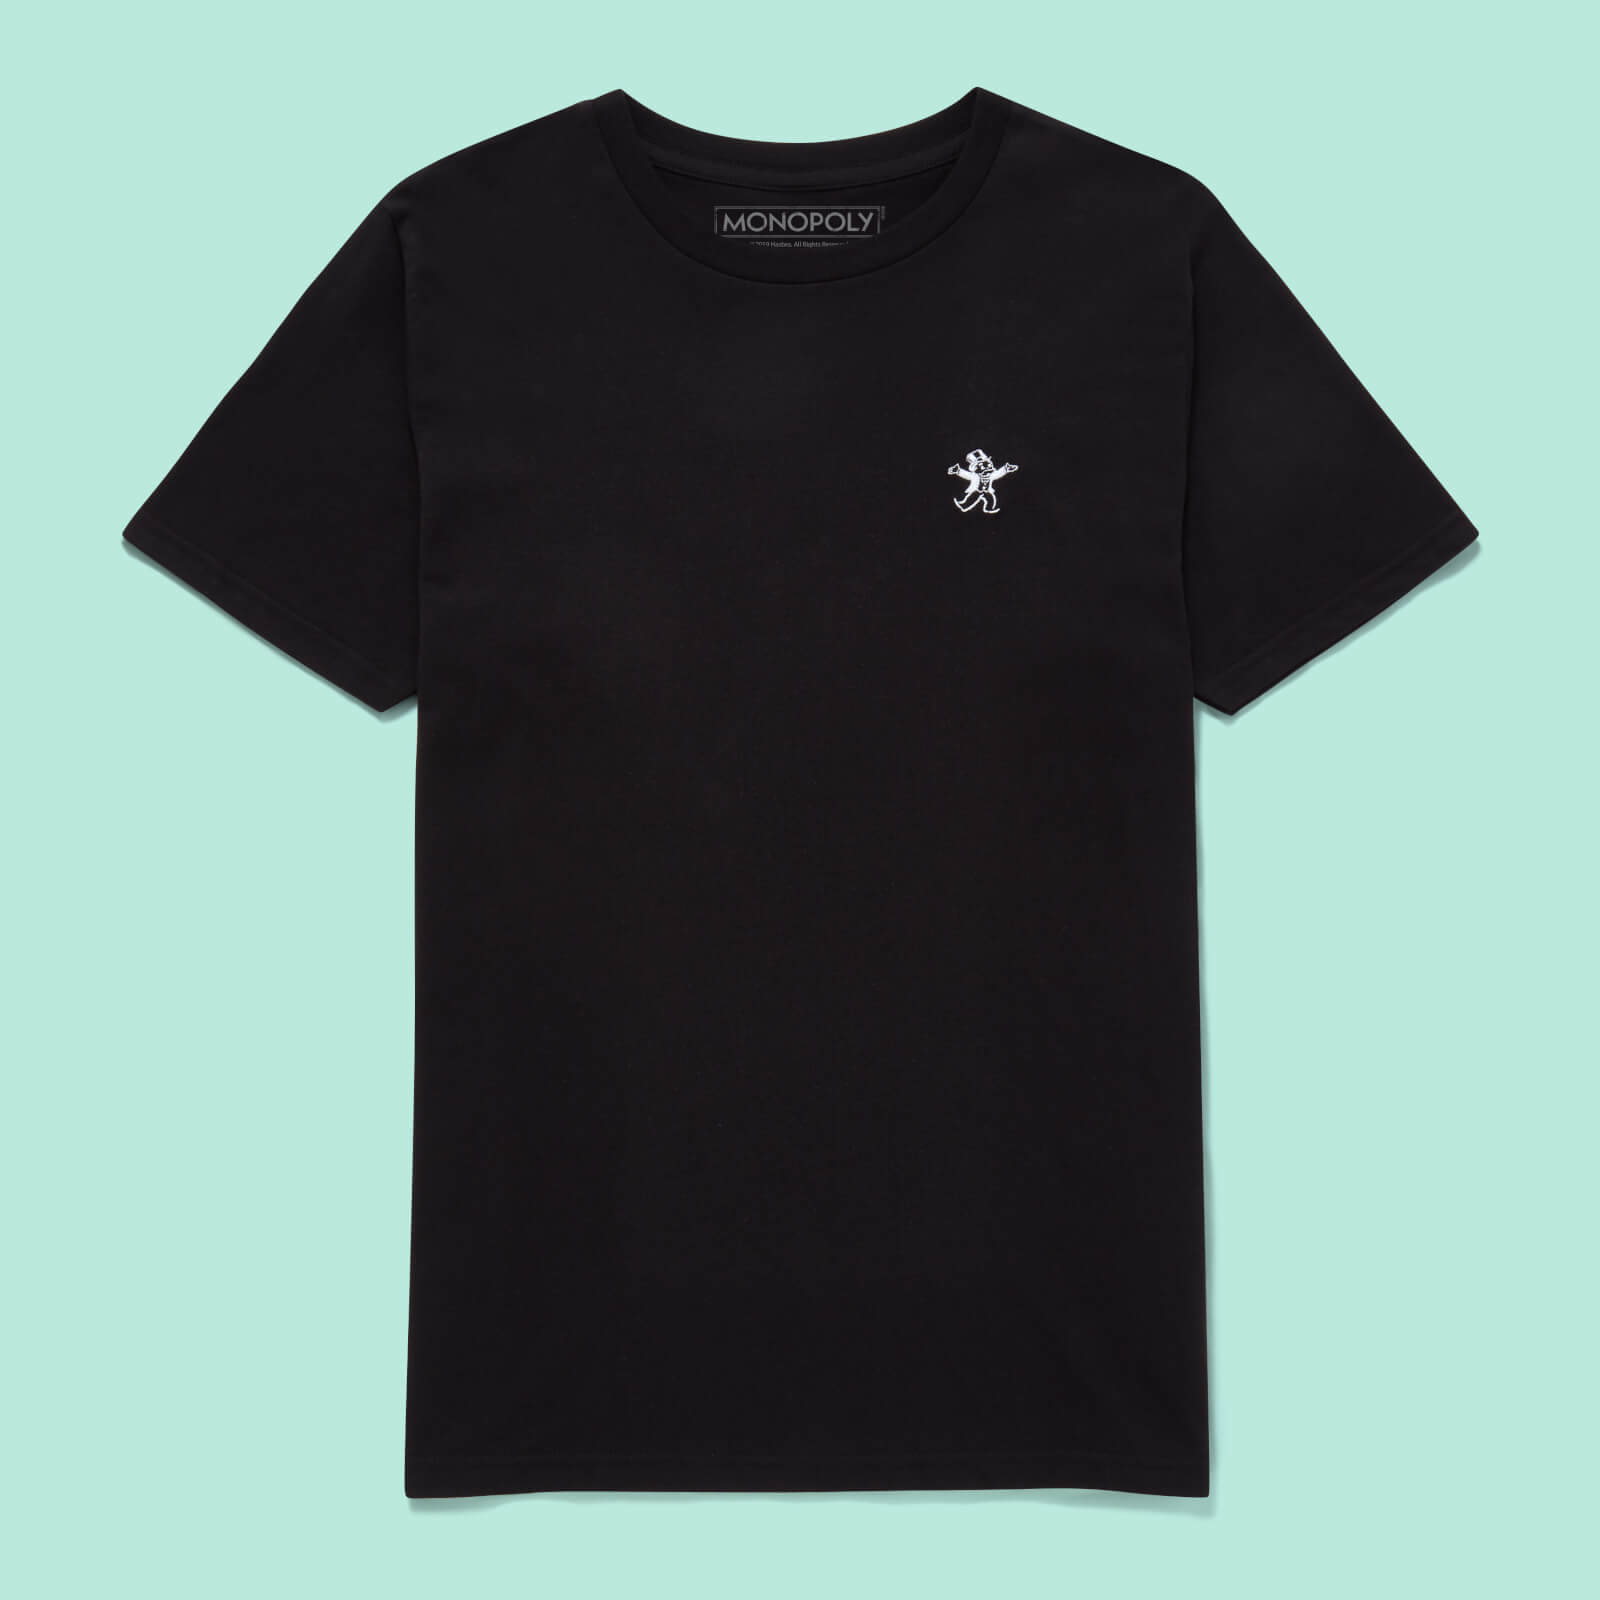 Monopoly Mr Monopoly Embroidered T-Shirt - Black - S von Monopoly